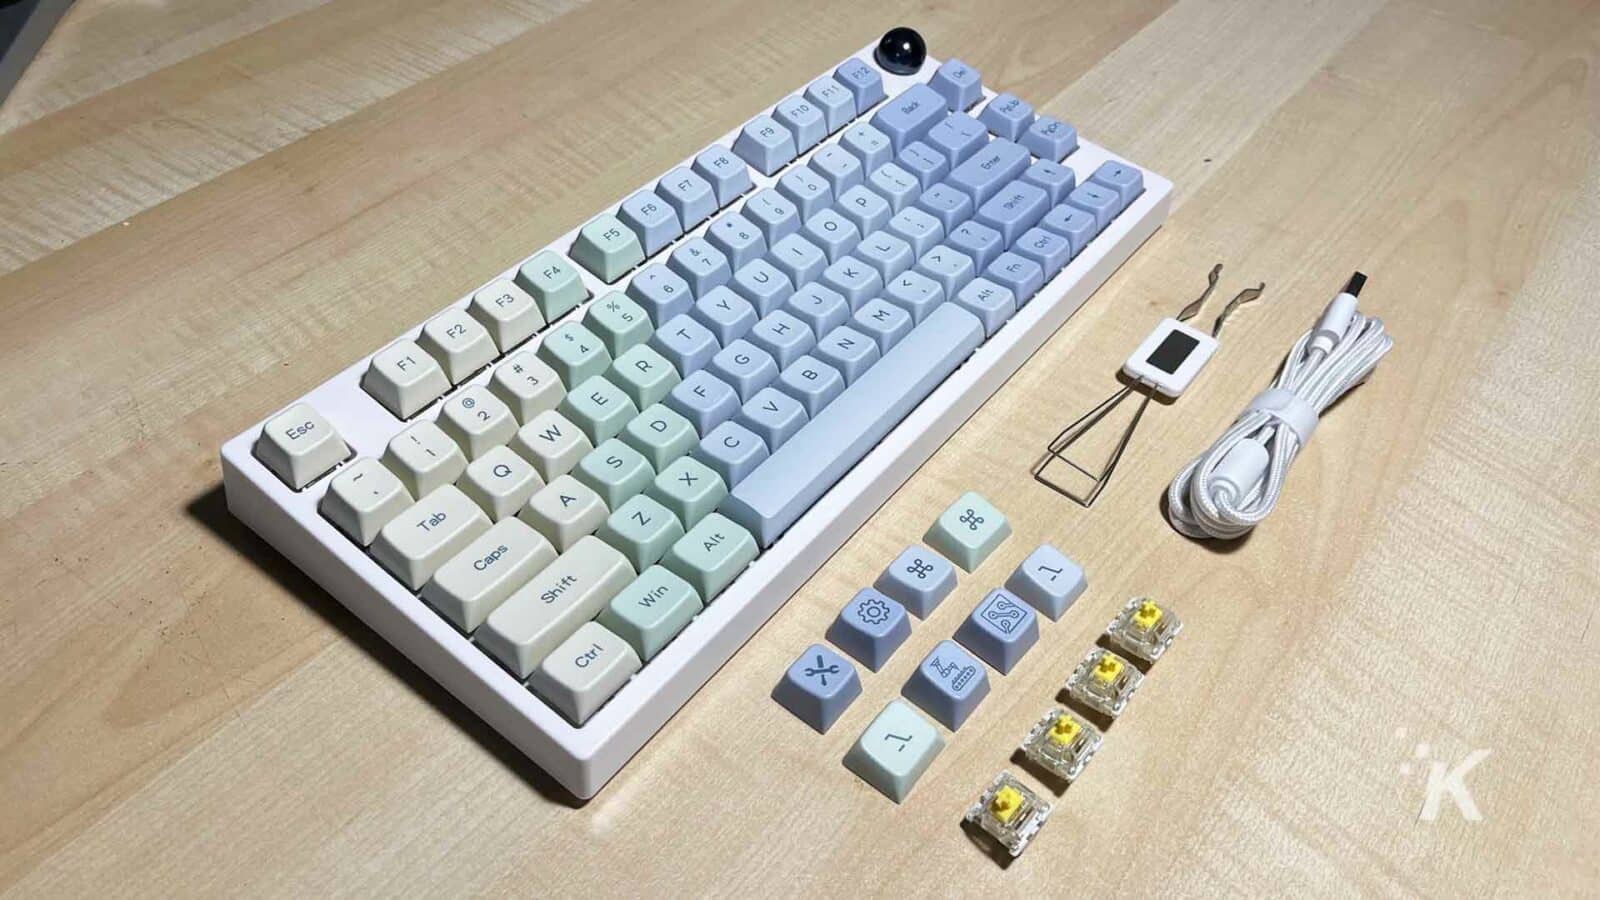 EPOMAKER TH80 PRO keyboard with accessories